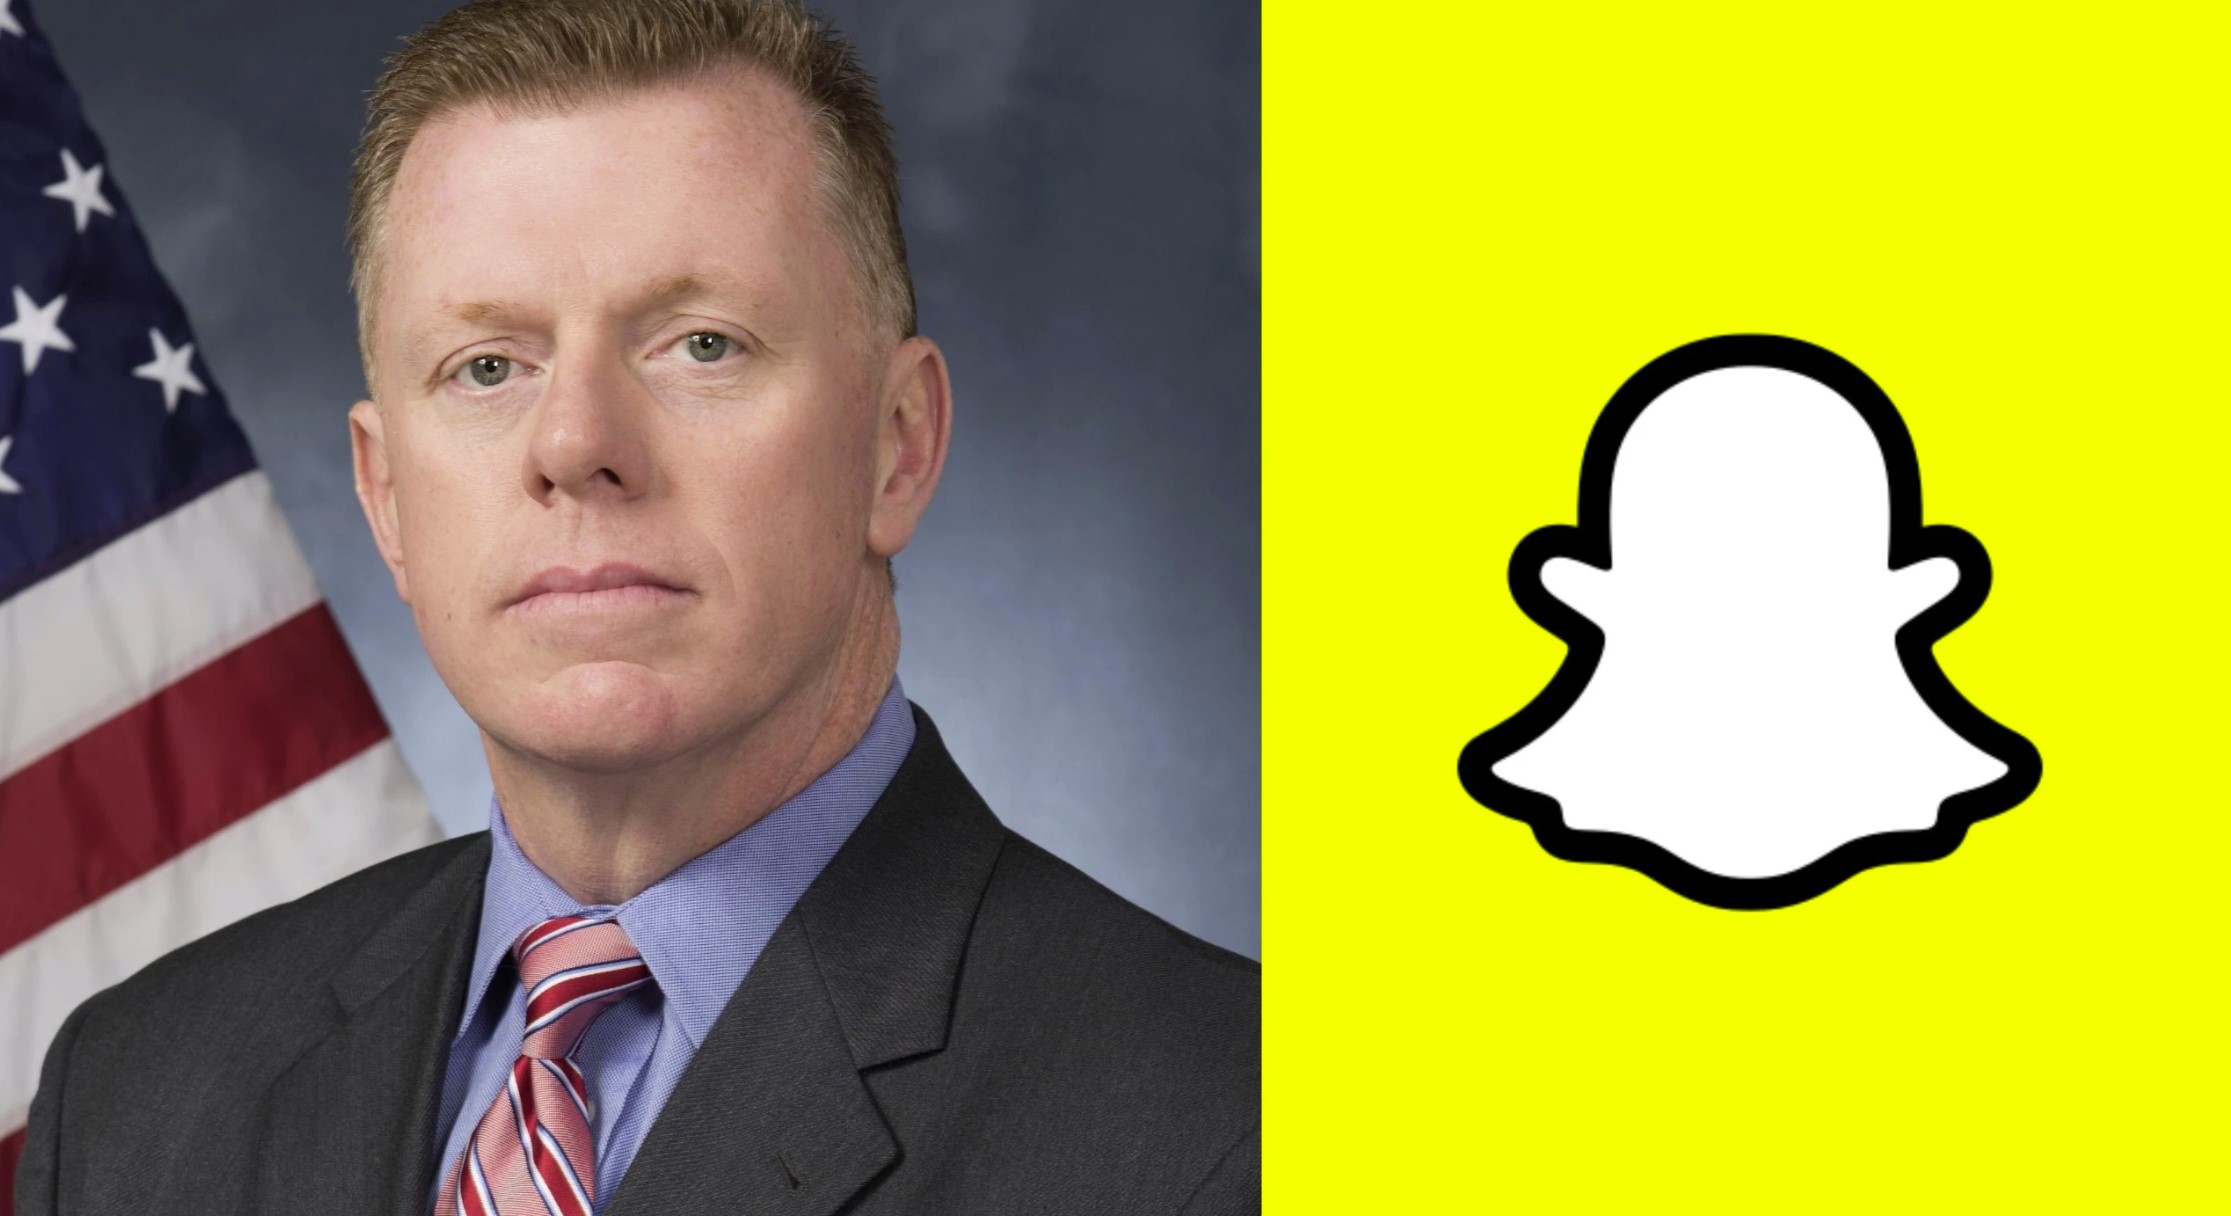 The head of the Secret Service is hired to lead employee security by Snapchat